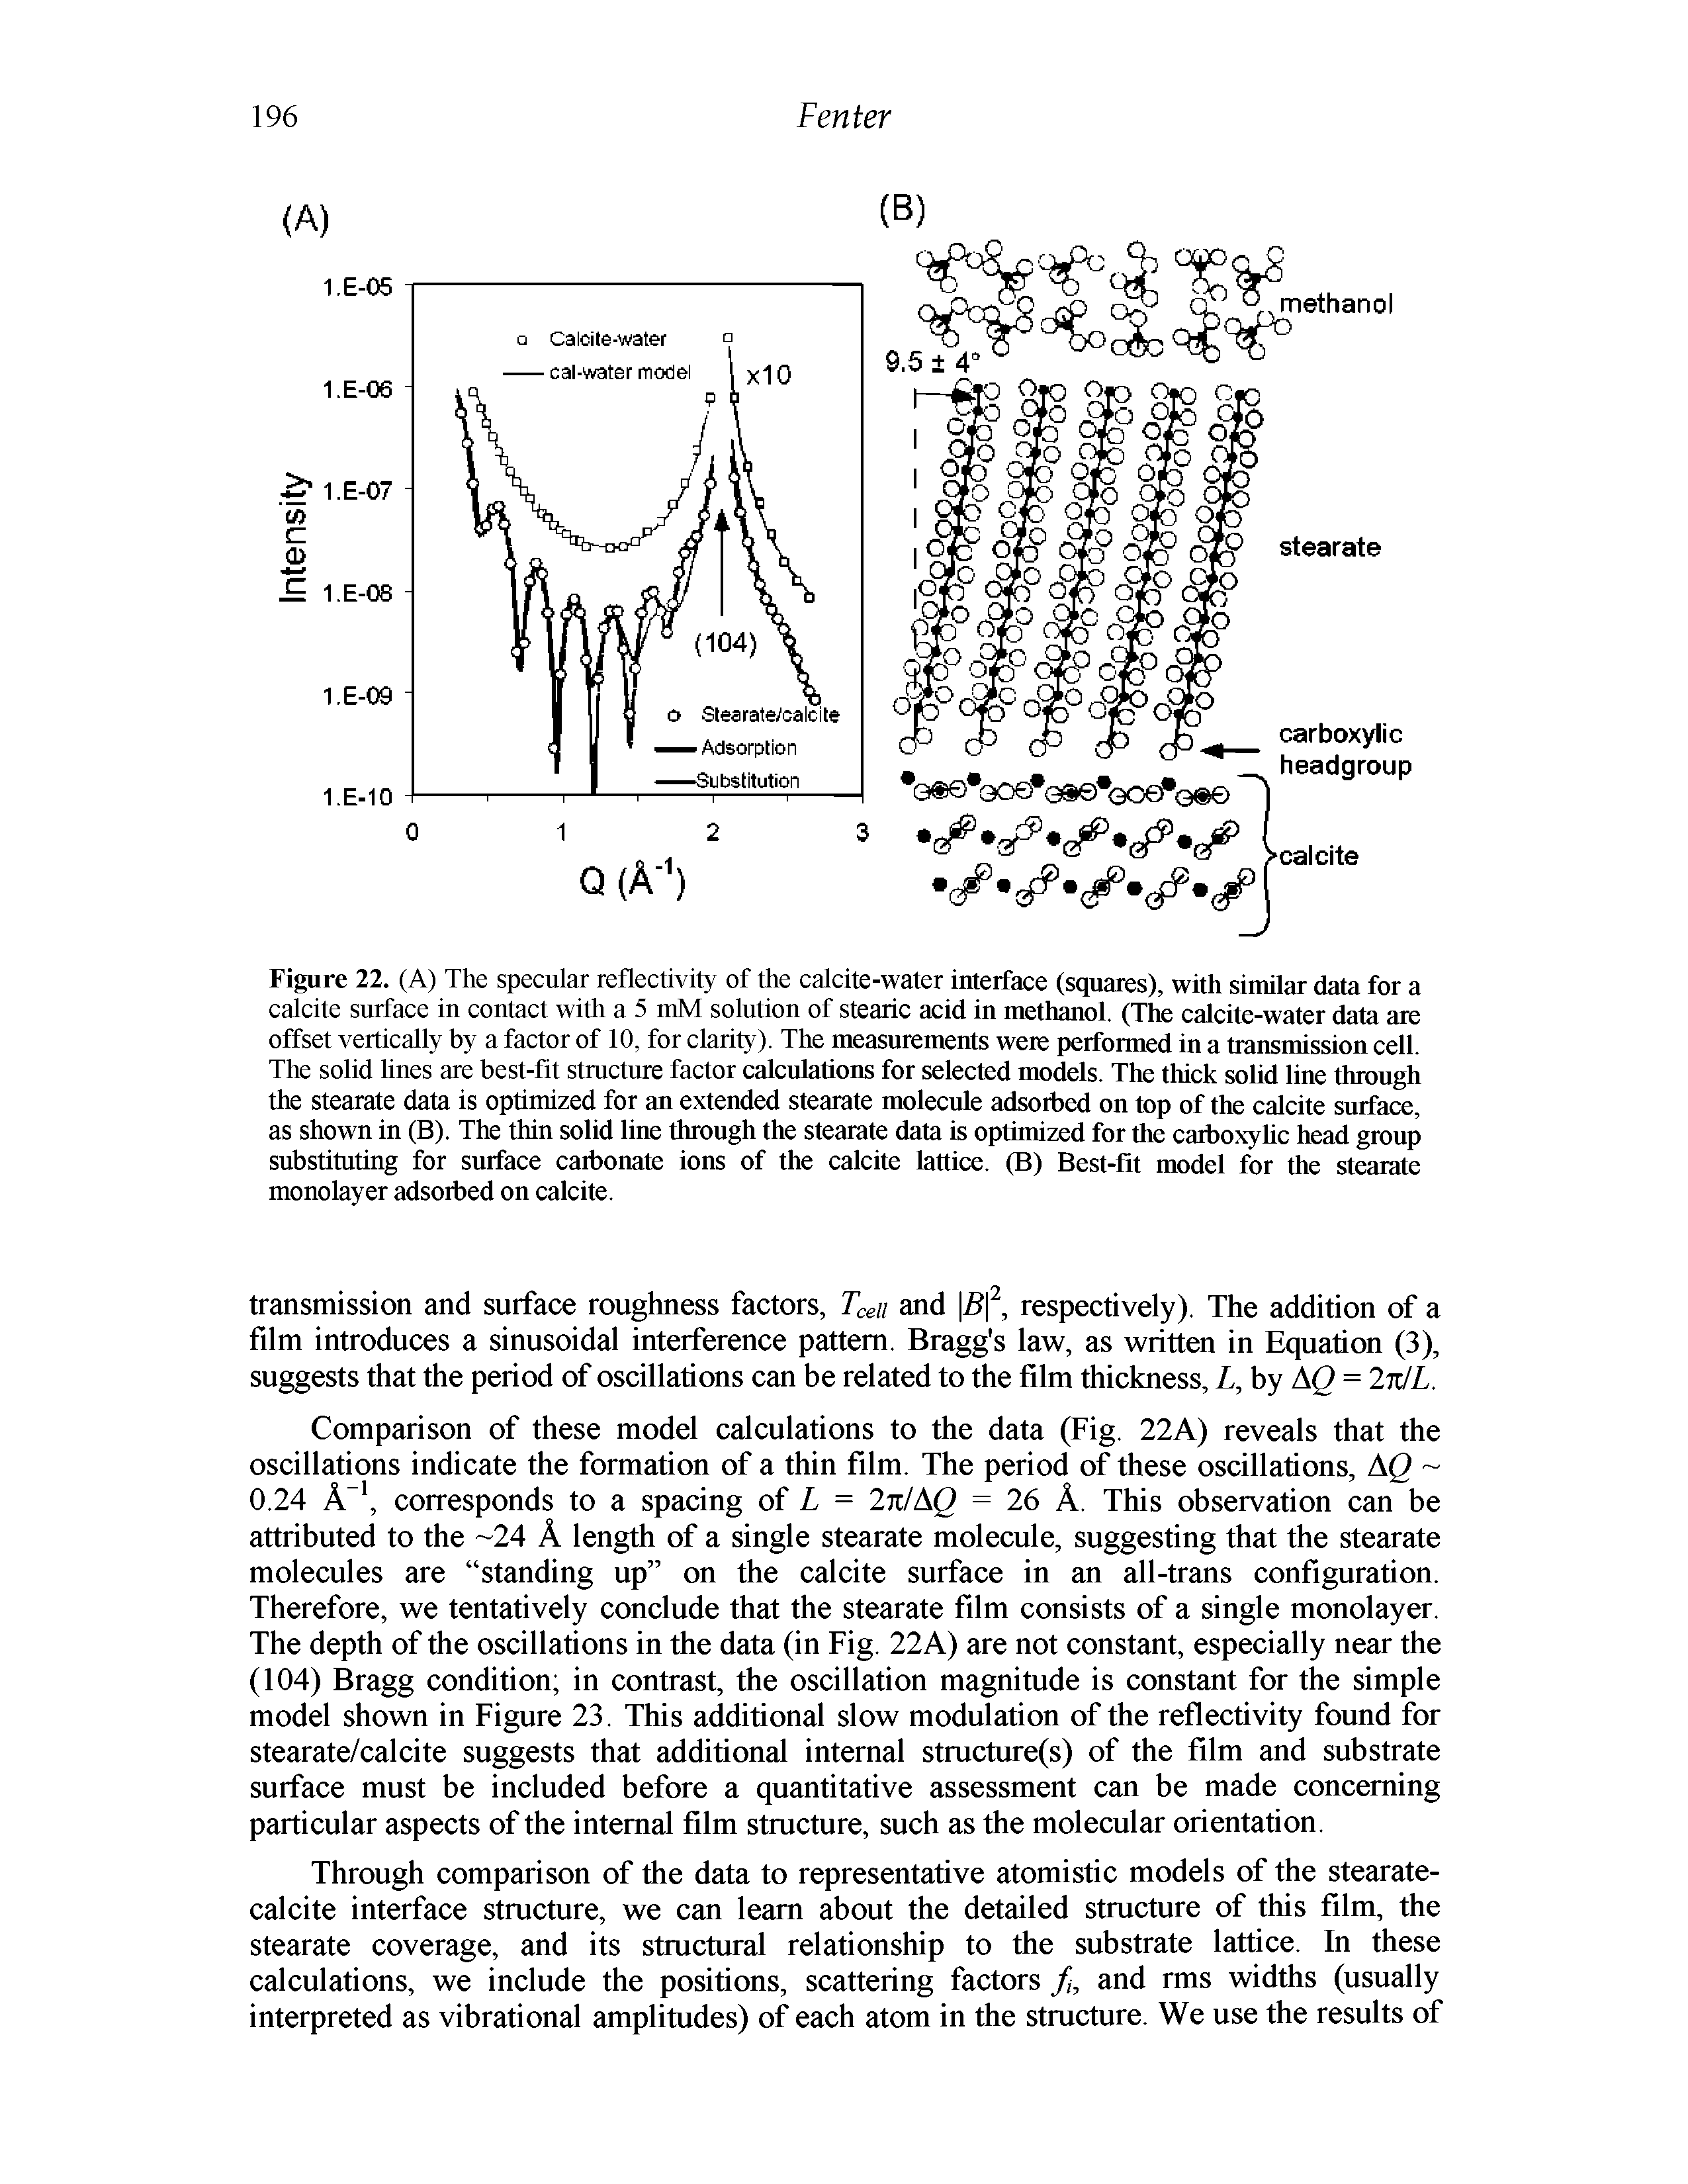 Figure 22. (A) The specular reflectivity of the calcite-water interface (squares), with similar data for a calcite surface in contact with a 5 mM solution of stearic acid in methanol (The calcite-water data are offset vertically by a factor of 10, for clarity). The measurements were performed in a transmission cell. The solid lines are best-fit structure factor calculations for selected models. The thick solid line through the stearate data is optimized for an extended stearate molecule adsoibed on top of the calcite surface, as shown in (B). The thin solid line through the stearate data is optimized for the carboxylic head group substituting for surface carbonate ions of the calcite lattice. (B) Best-fit model for the stearate monolayer adsorbed on calcite.